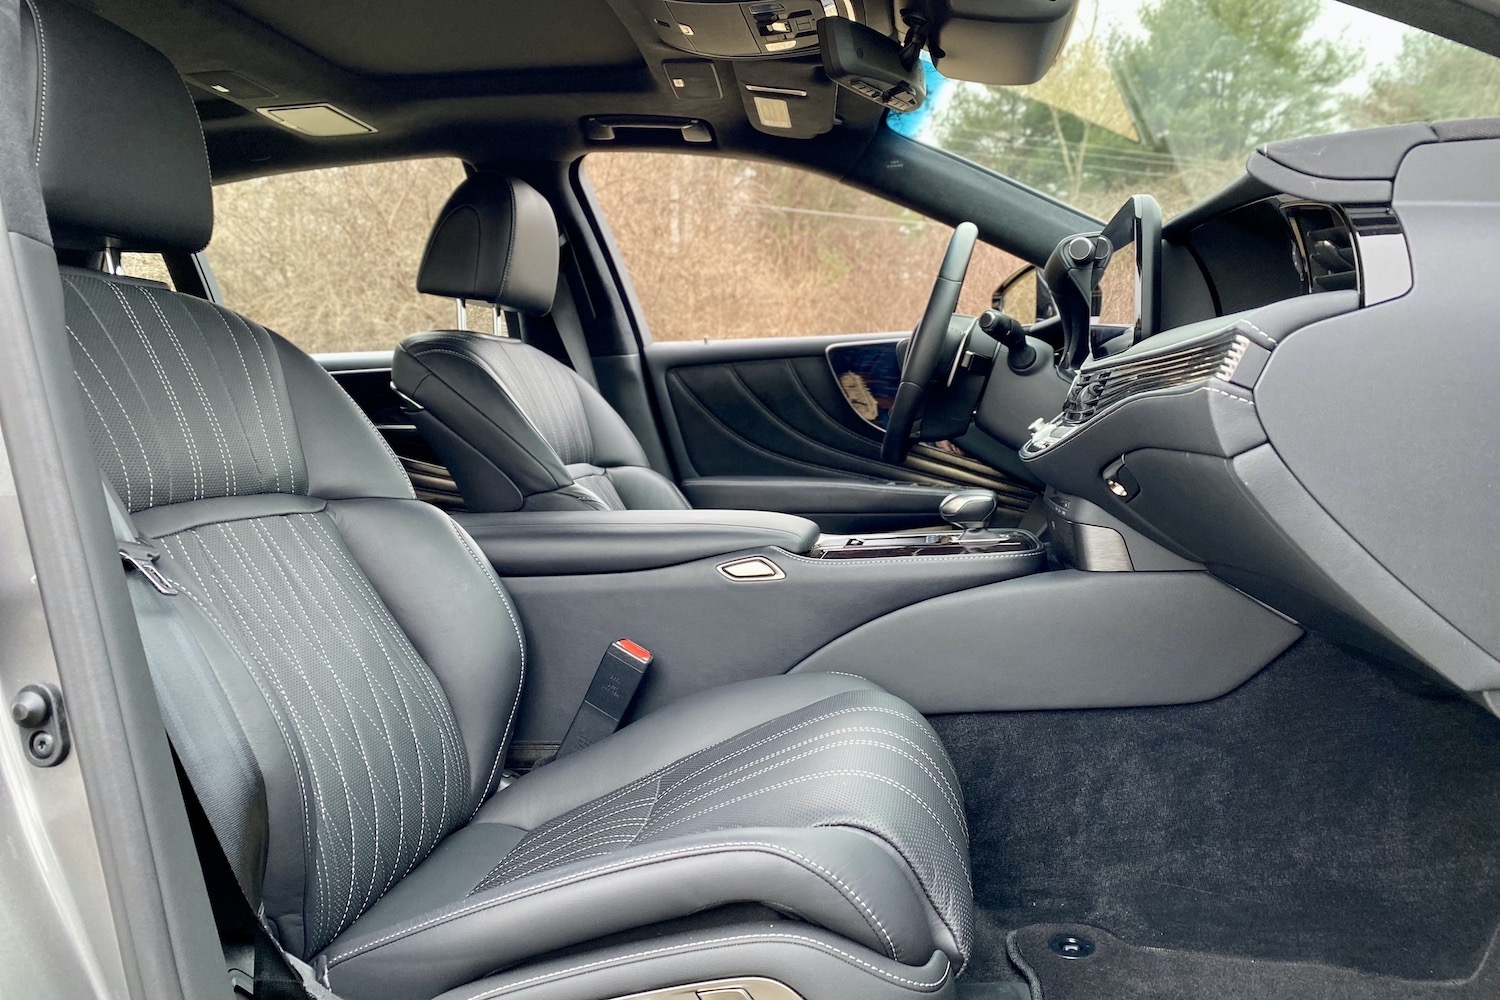 The front seats in the 2021 Lexus LS500 from outside.